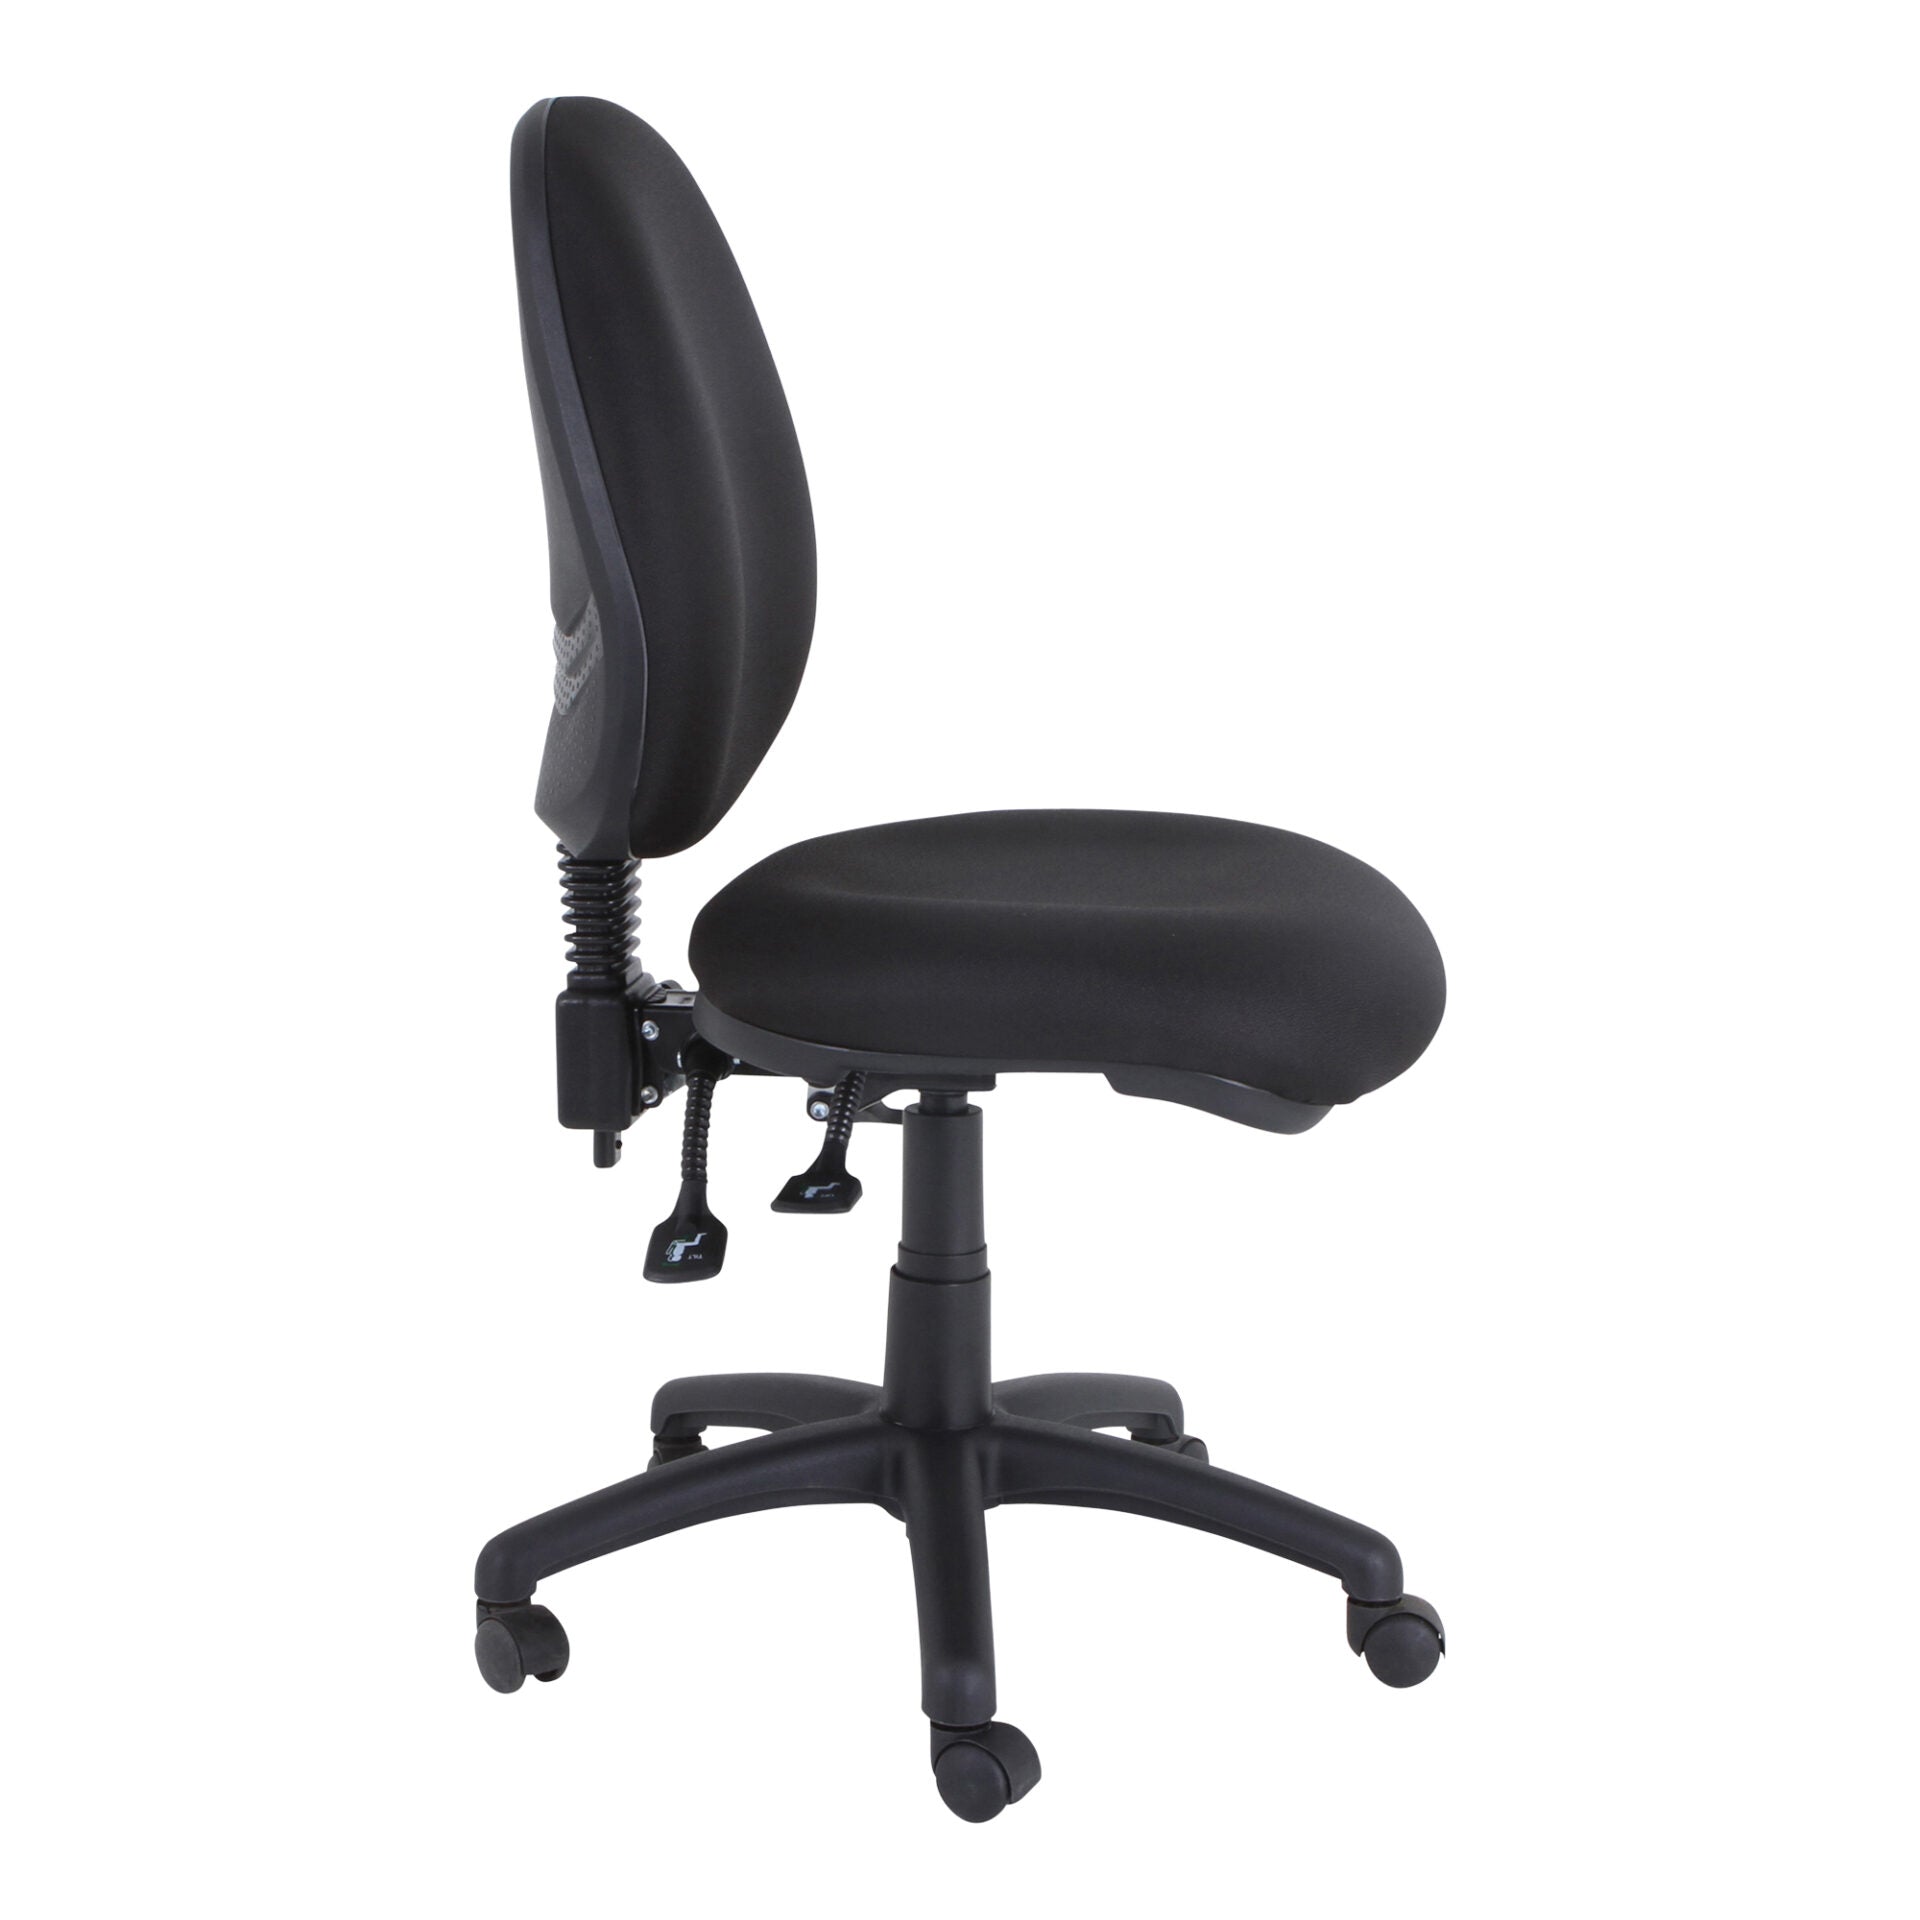 Mondo Java high-back task chair in black, side view.